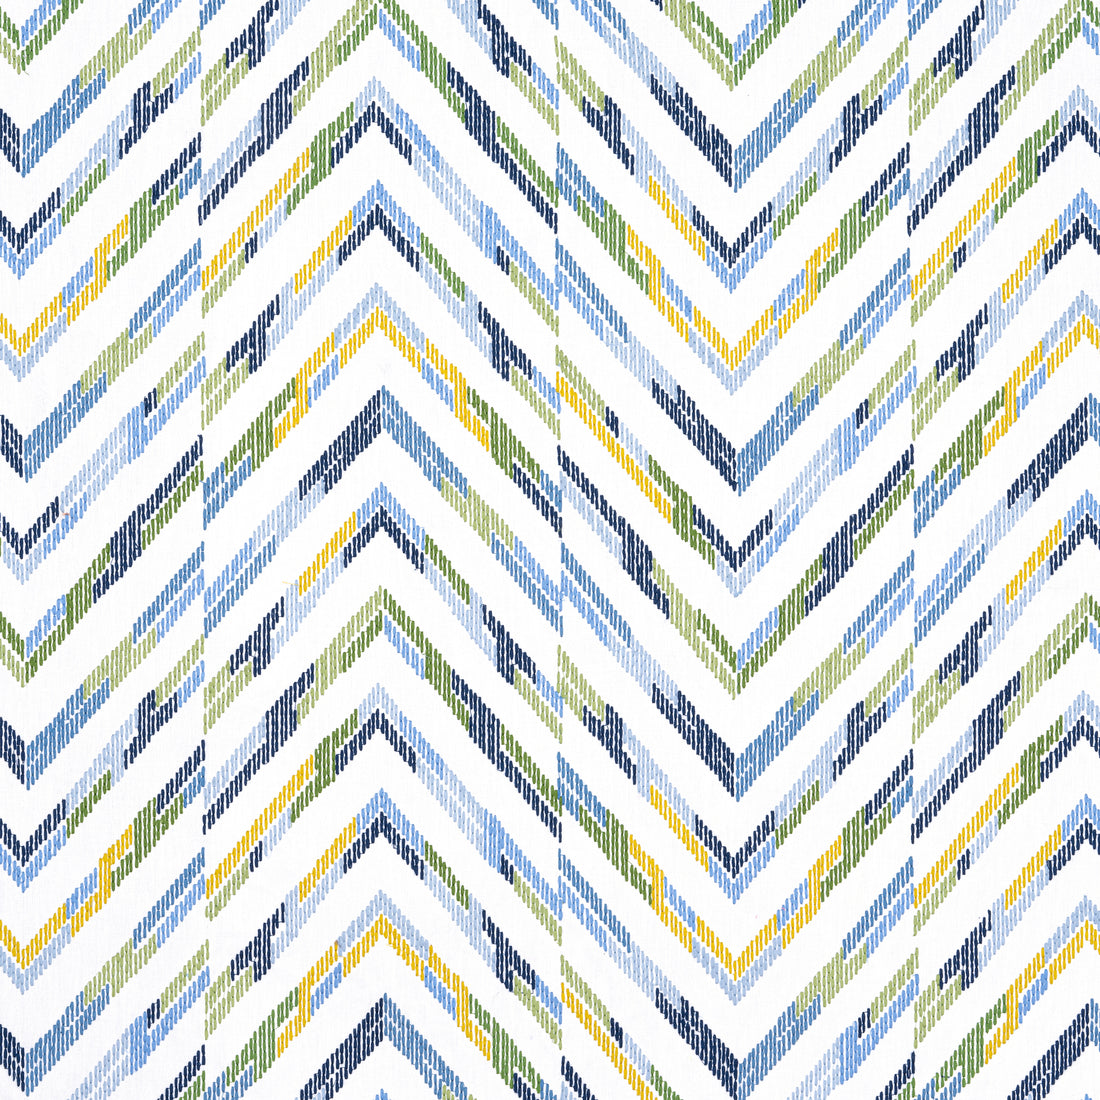 Hamilton Embroidery fabric in blue and yellow color - pattern number W714345 - by Thibaut in the Canopy collection